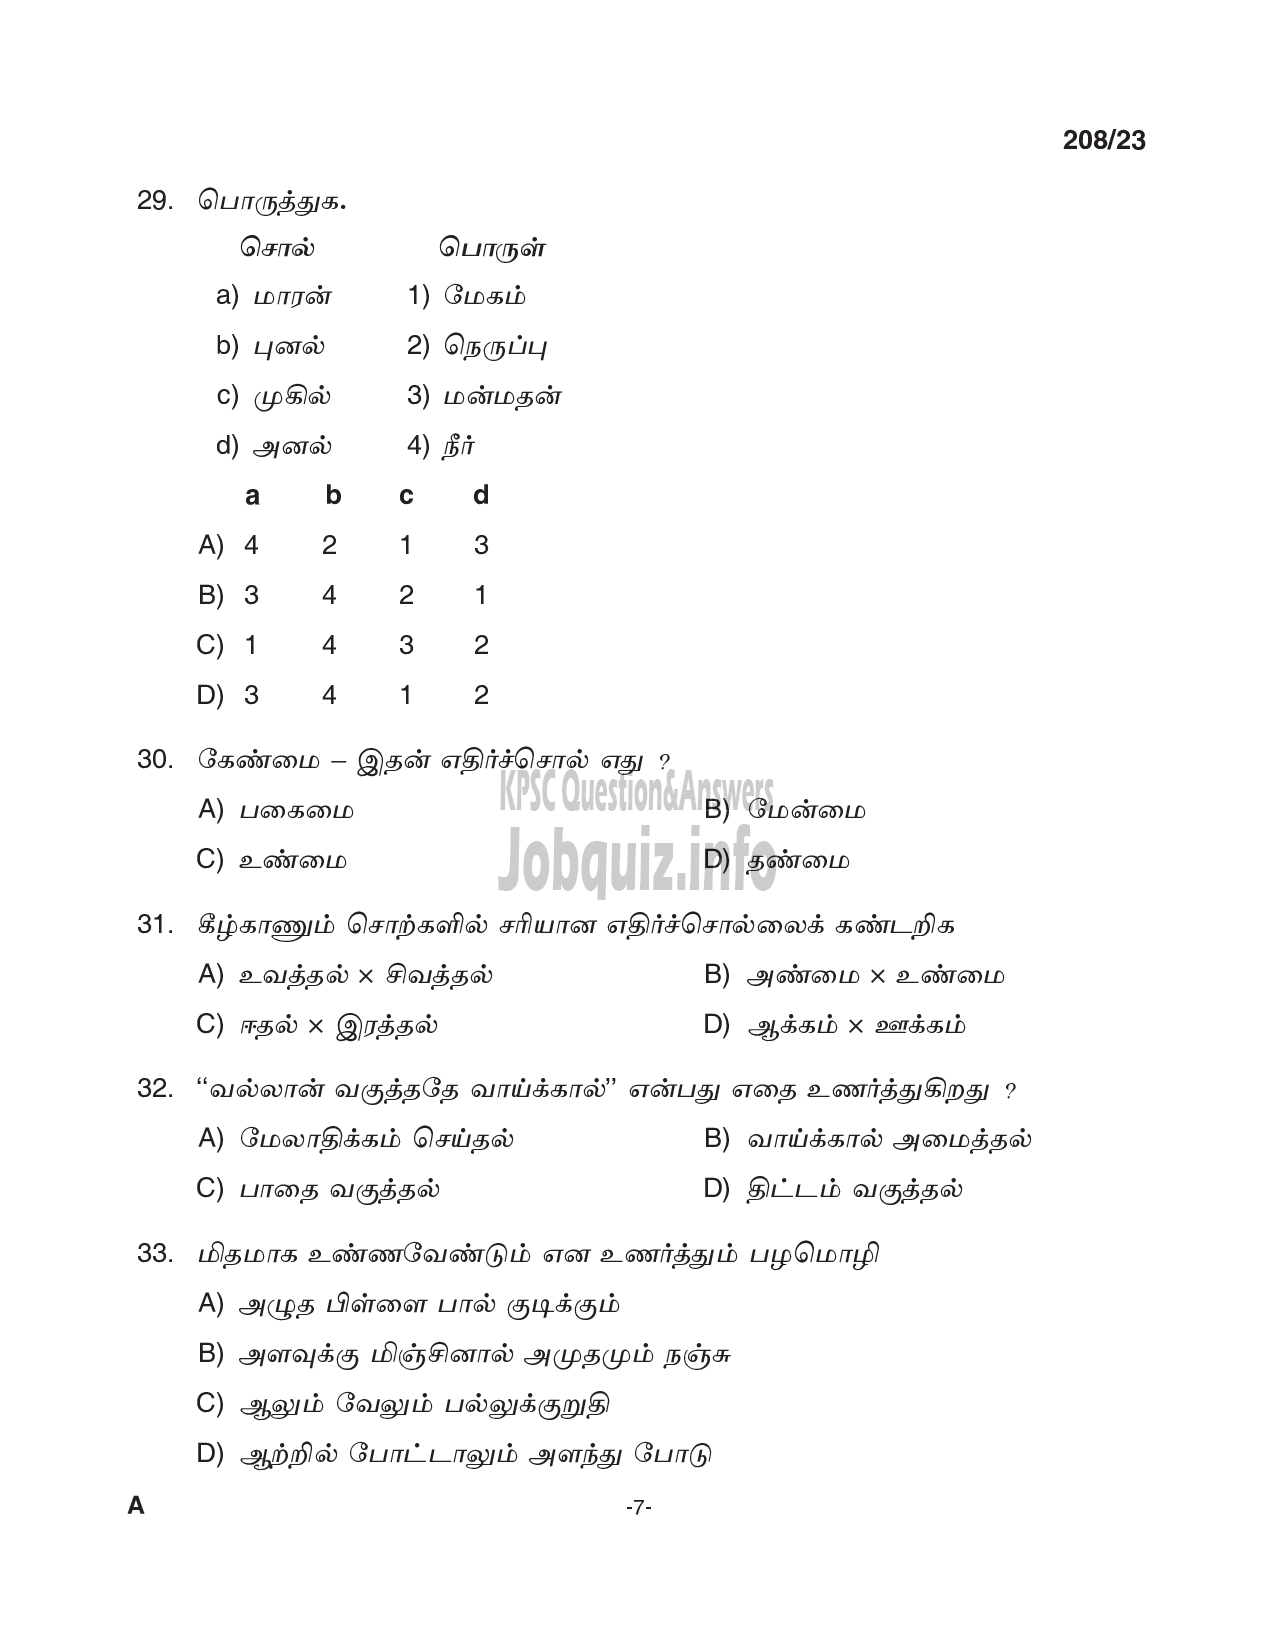 Kerala PSC Question Paper - Clerk/ LD Clerk (Tamil and Malayalam knowing) (Preliminary Examination)-7